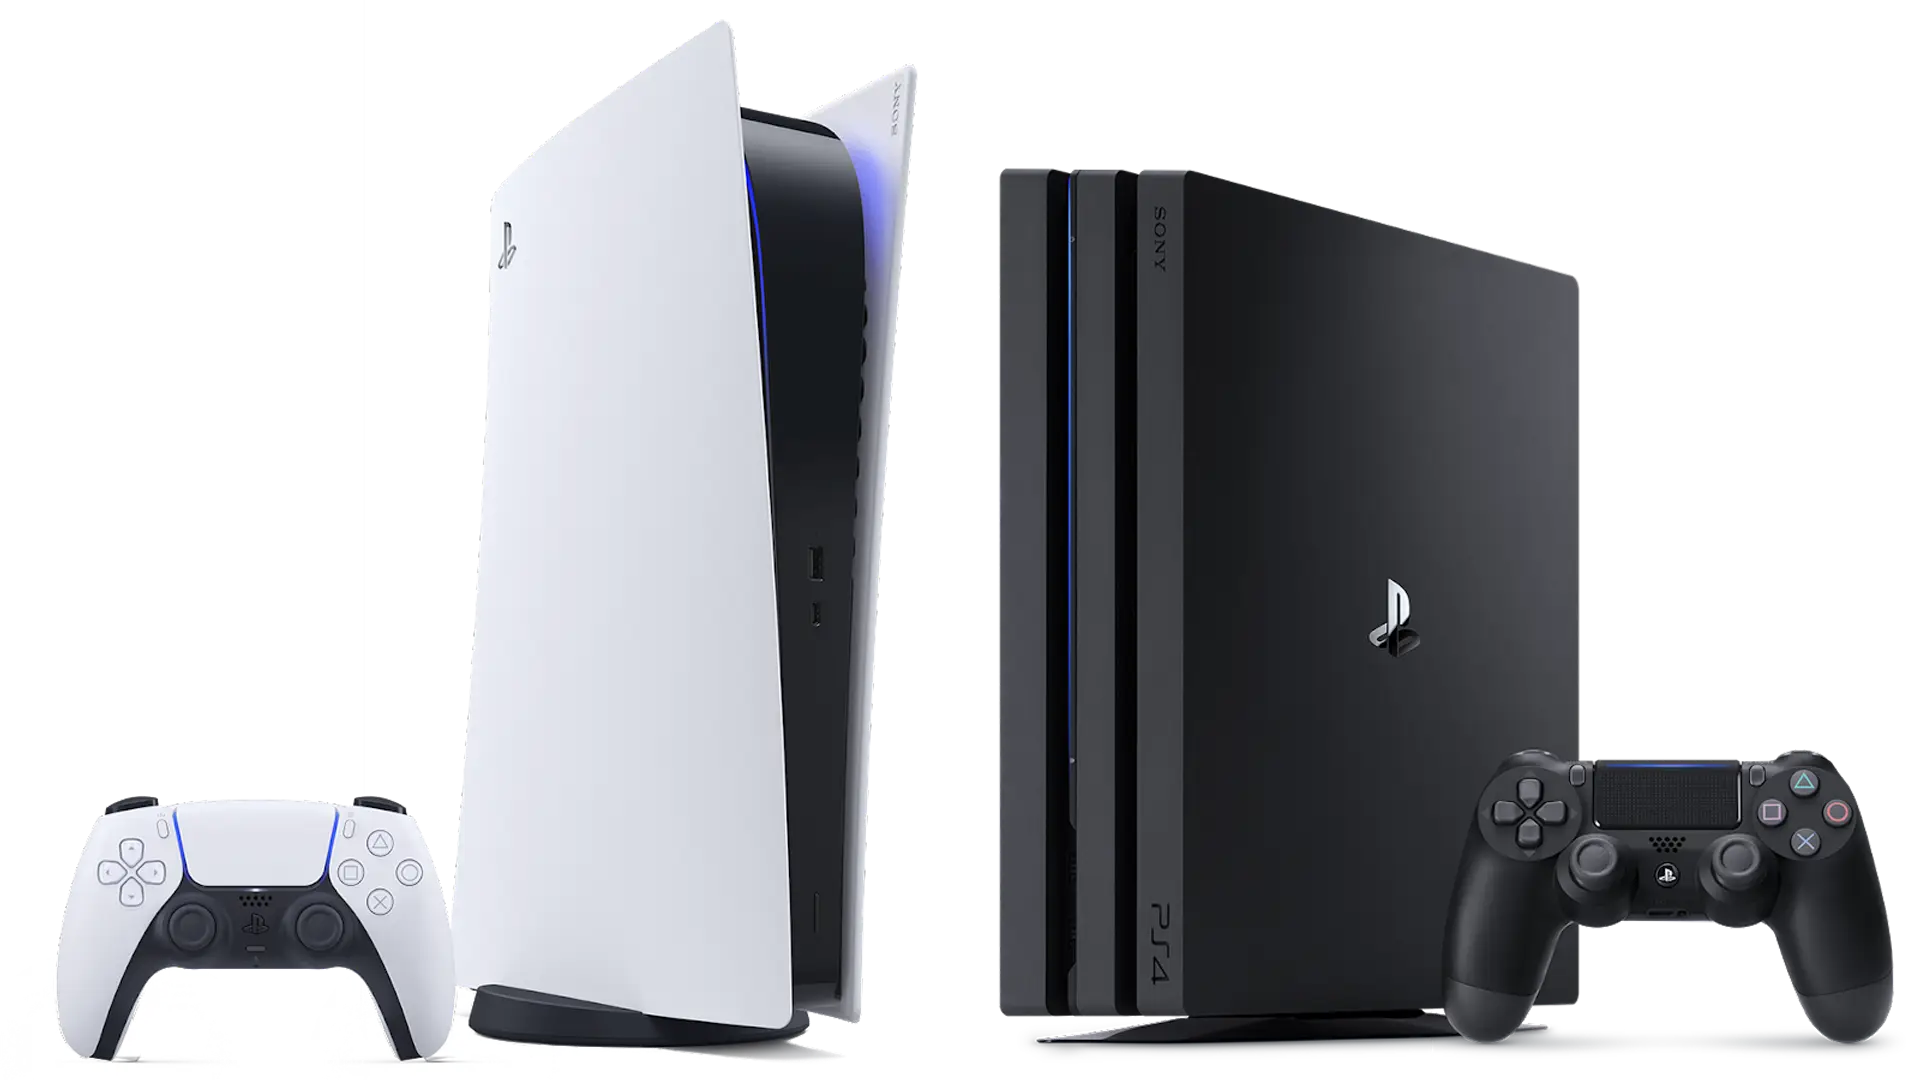 The PS5 and PS4 are one of the most successful consoles in history | Source